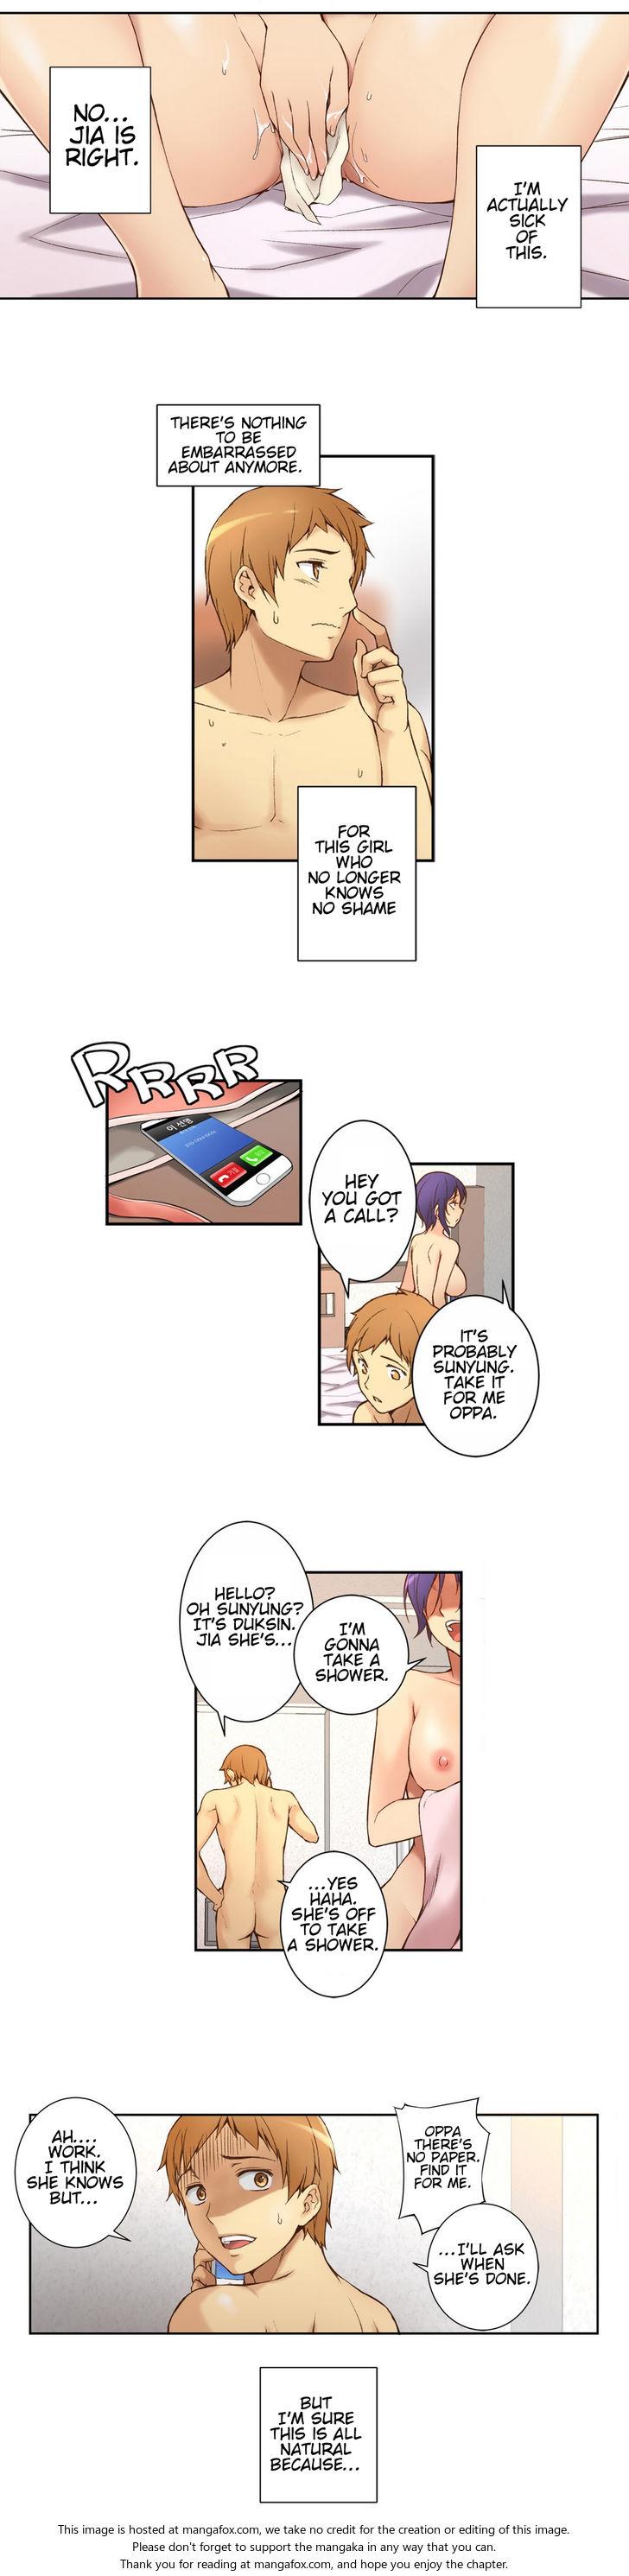 Virgin [Donggul Gom] She is Young (English) Part 1/2 Colombia - Page 8